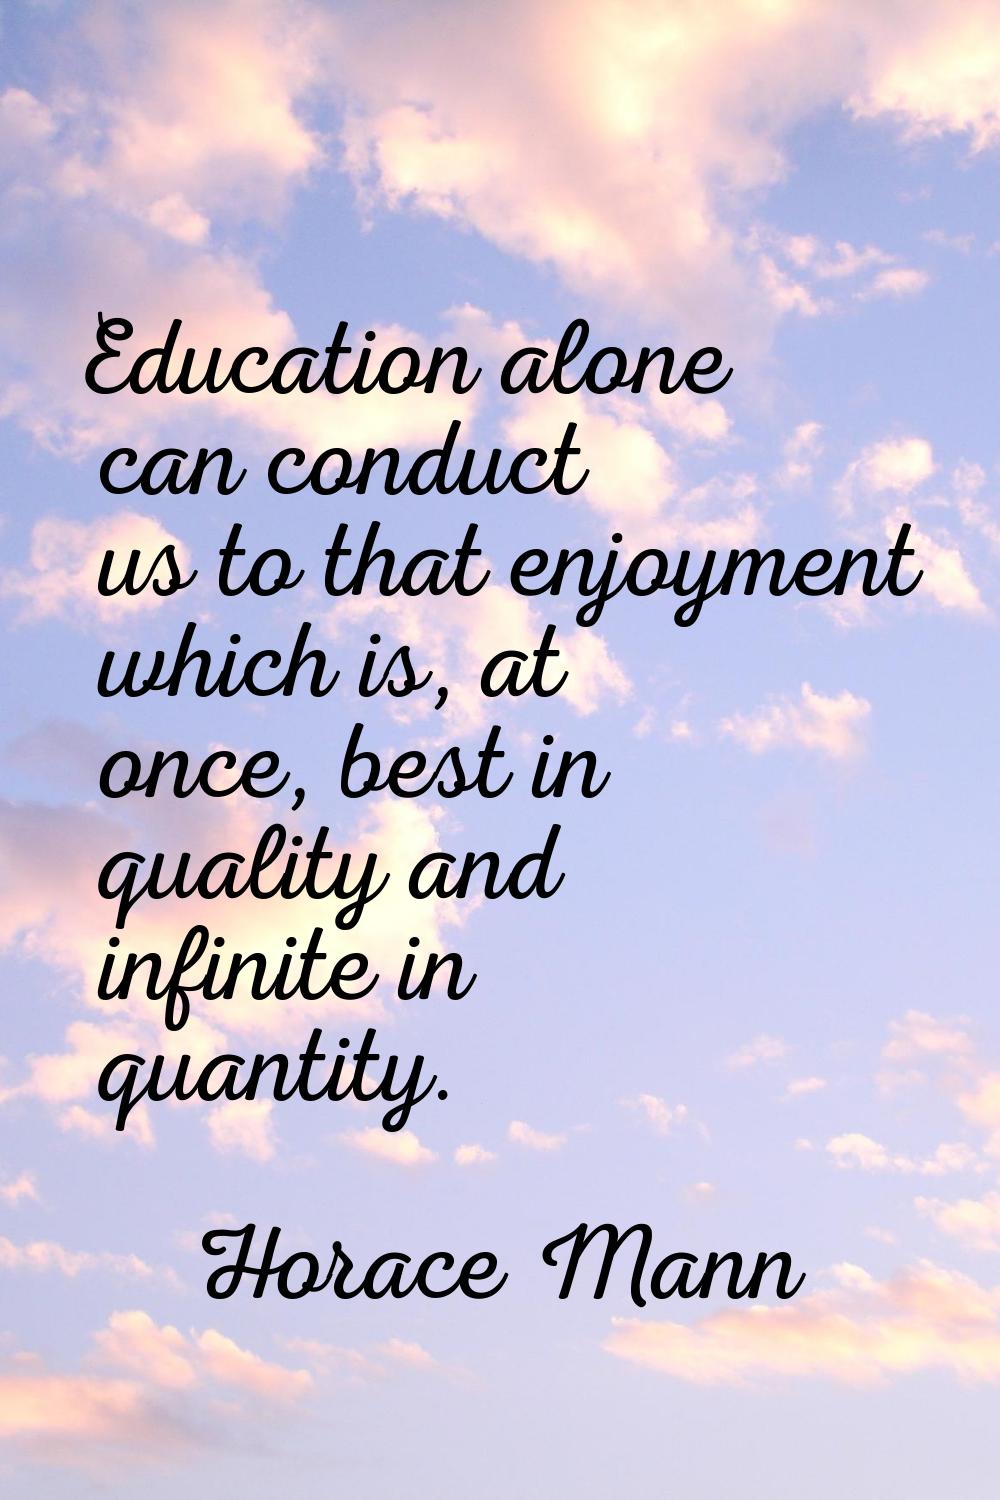 Education alone can conduct us to that enjoyment which is, at once, best in quality and infinite in